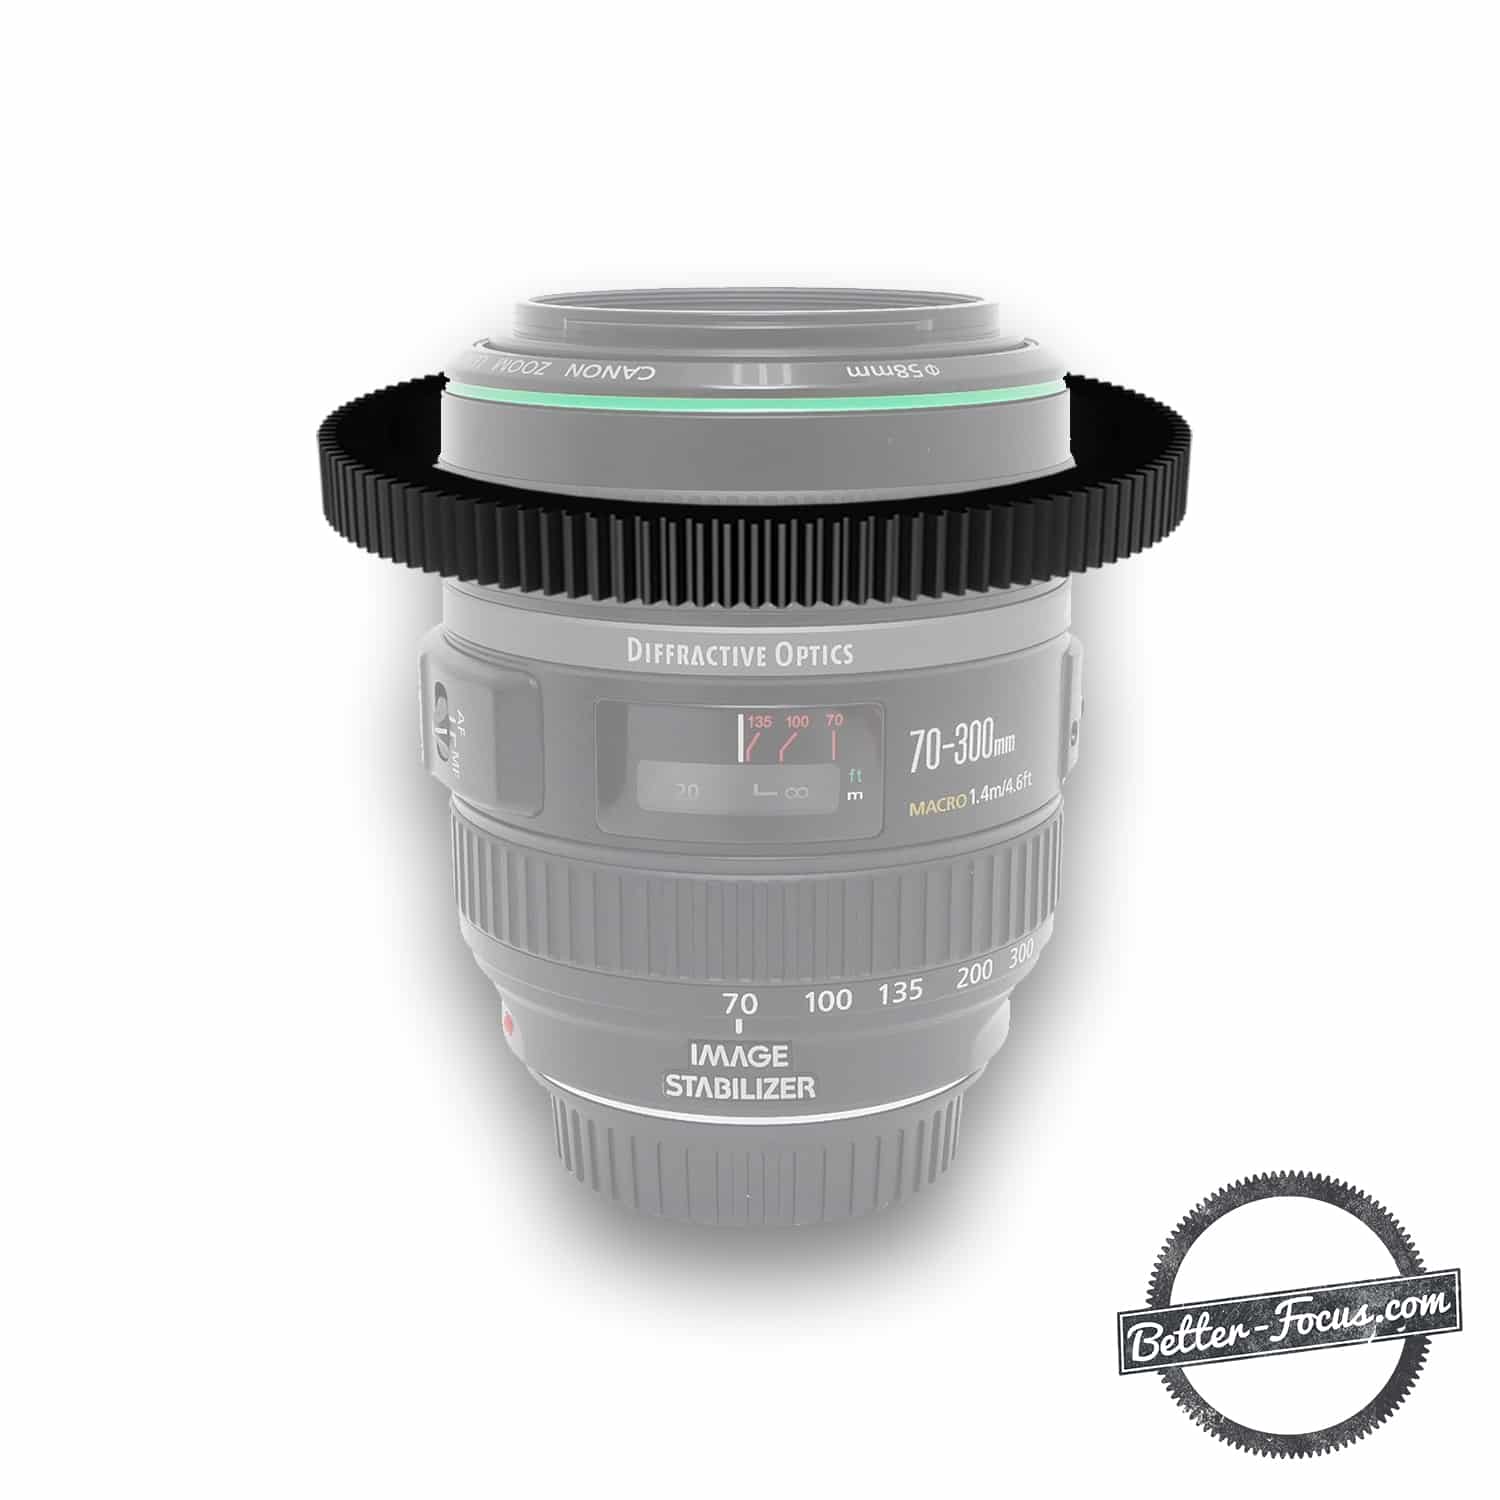 Follow Focus Gear for CANON EF 70-300MM F4.5-5.6 (DO VERSION ONLY)  lens